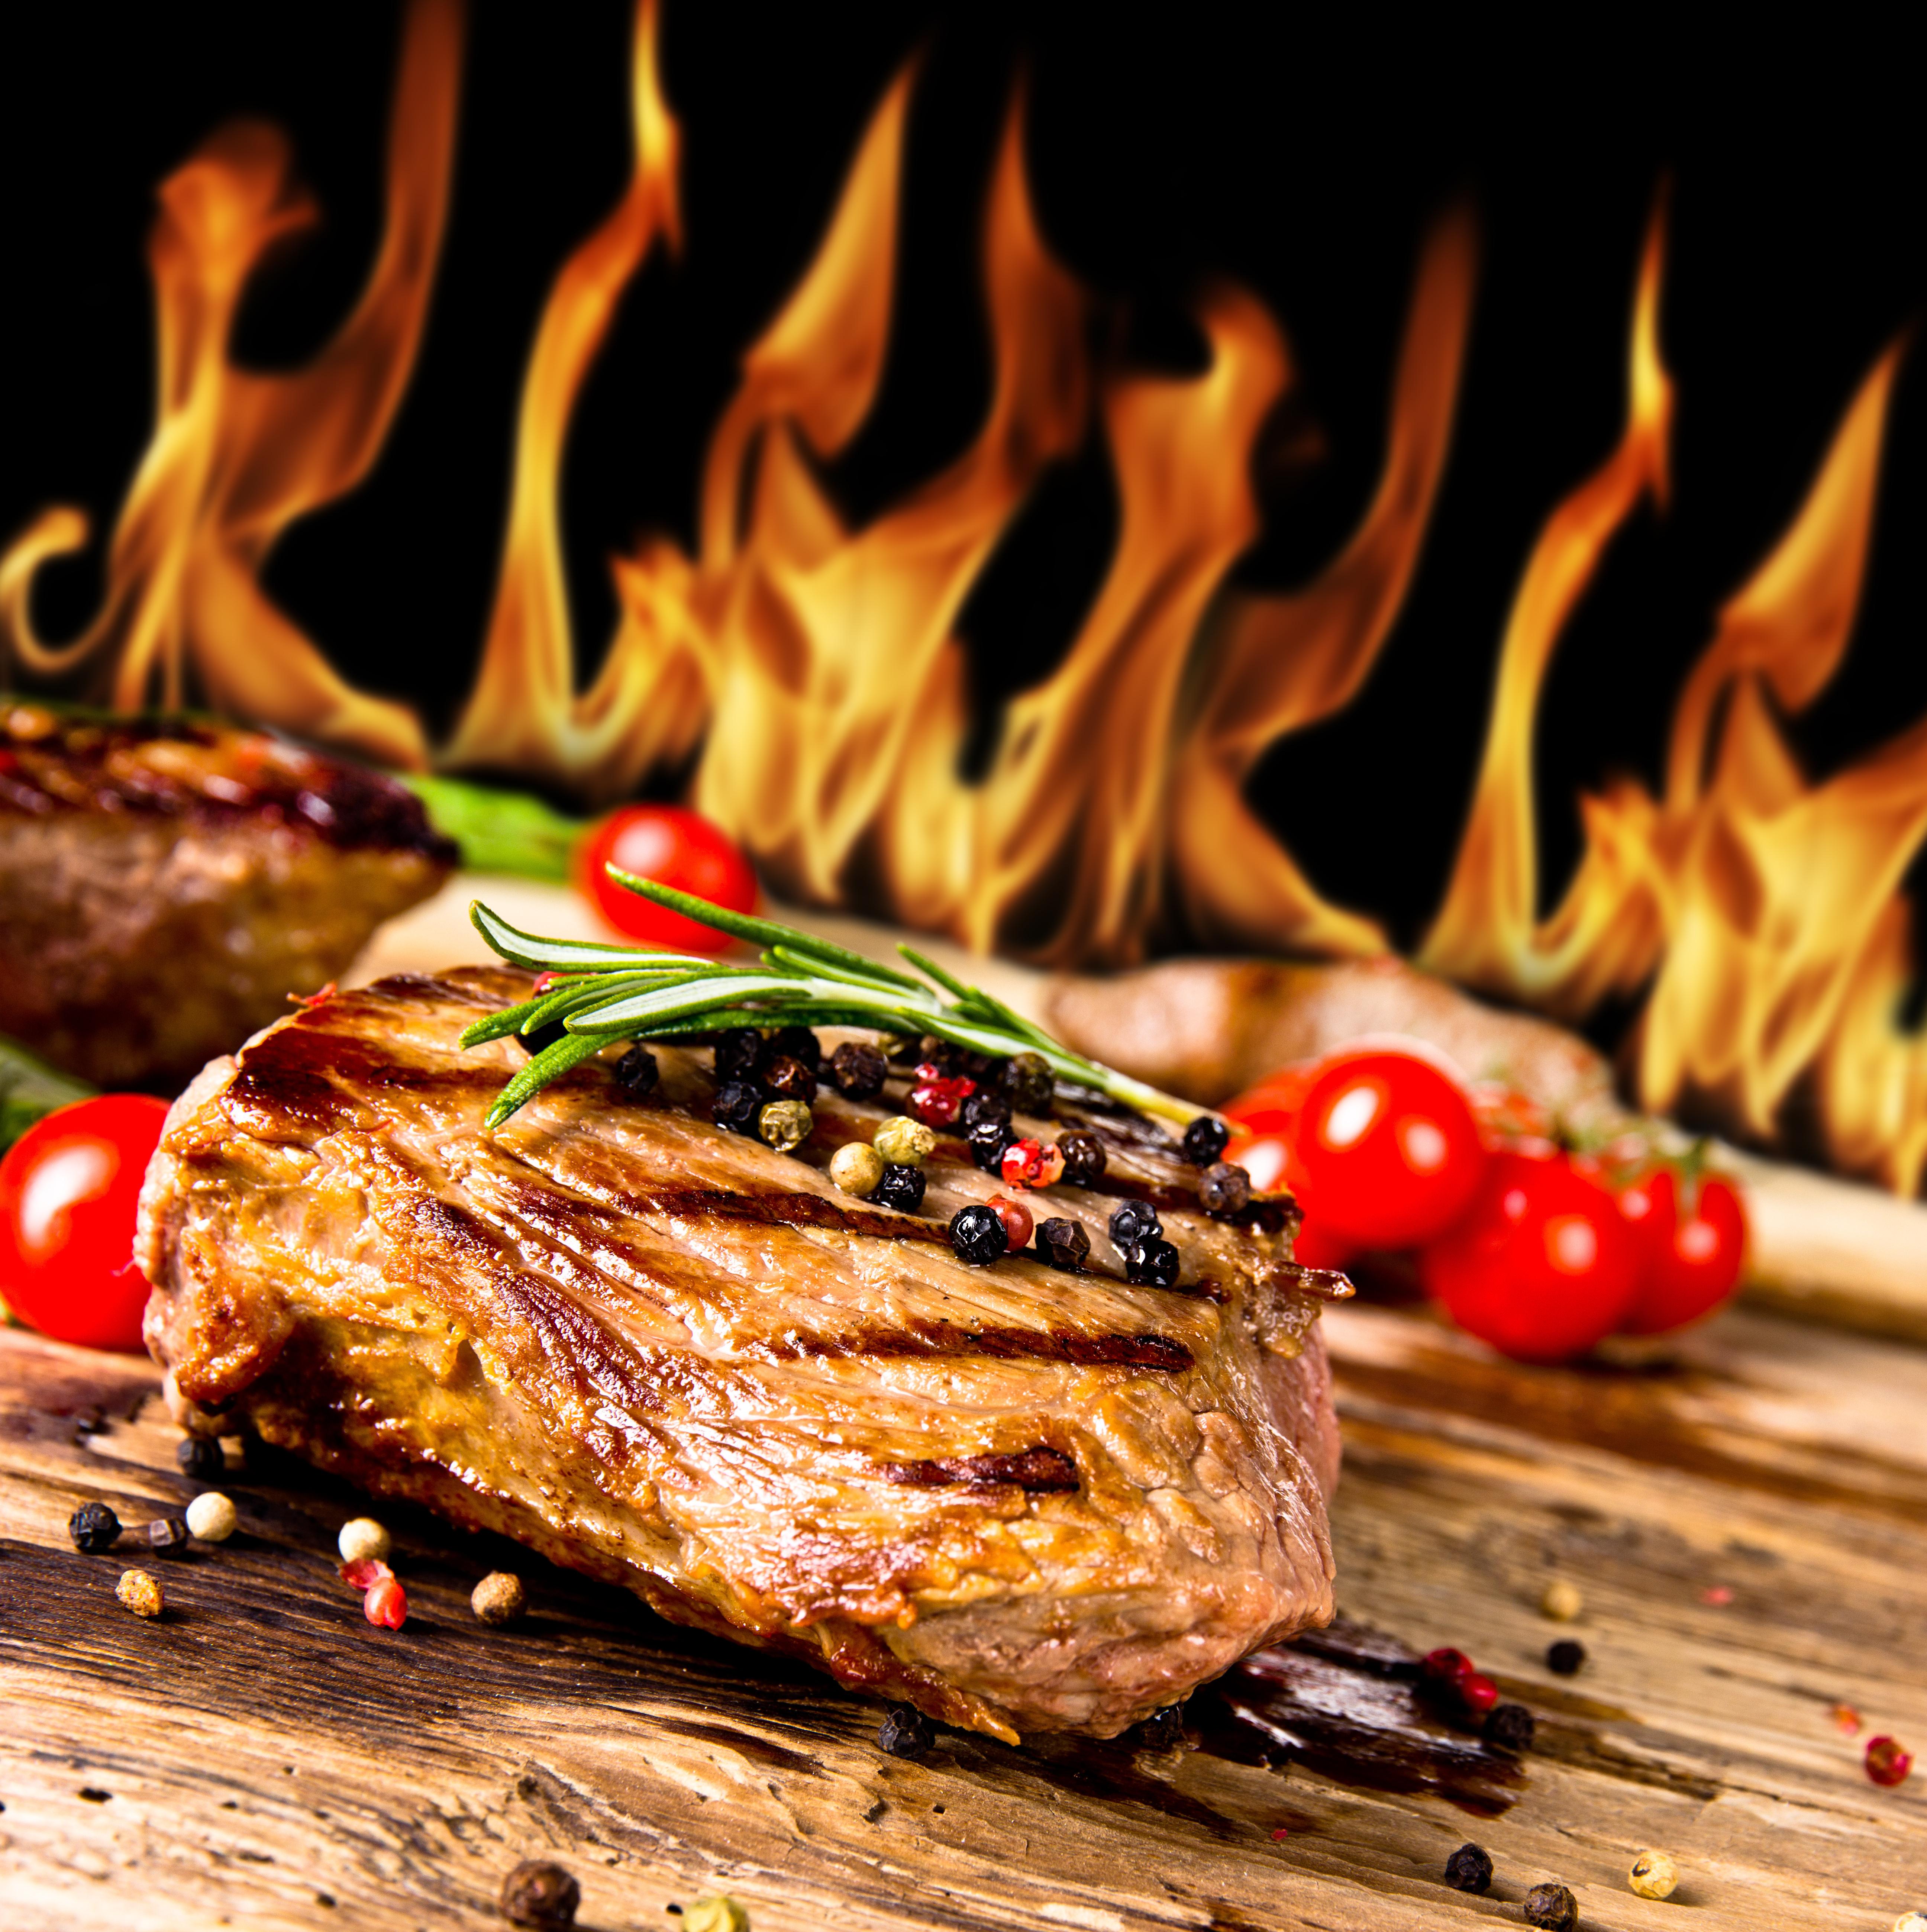 Grill Specialities From InterContinental Hotel Budapest